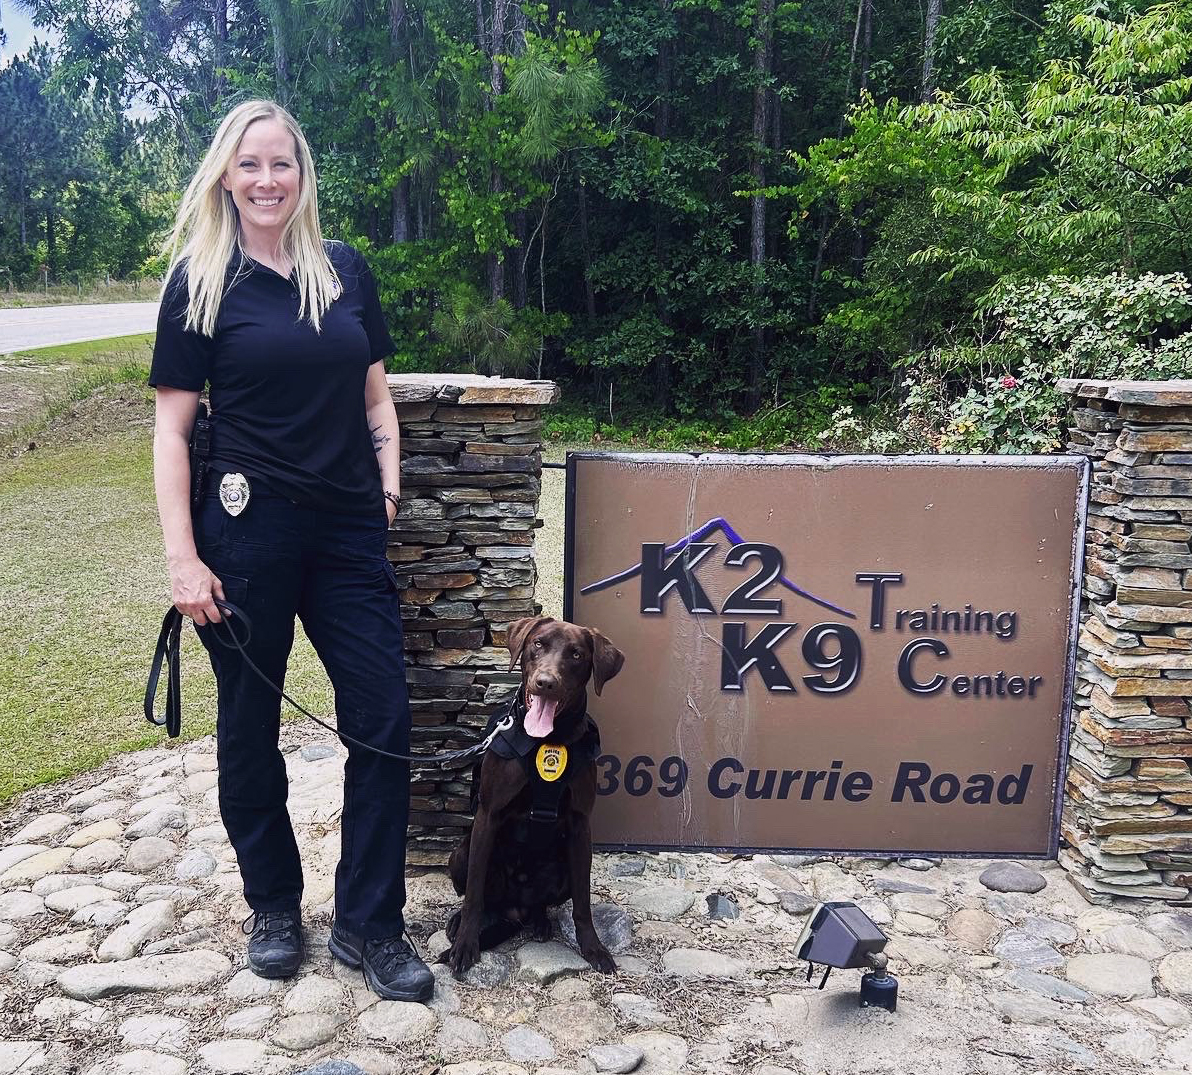 A blonde woman police officer and a chocolate lab police dog stand next to a sign that says "K2 K9 Training Center."